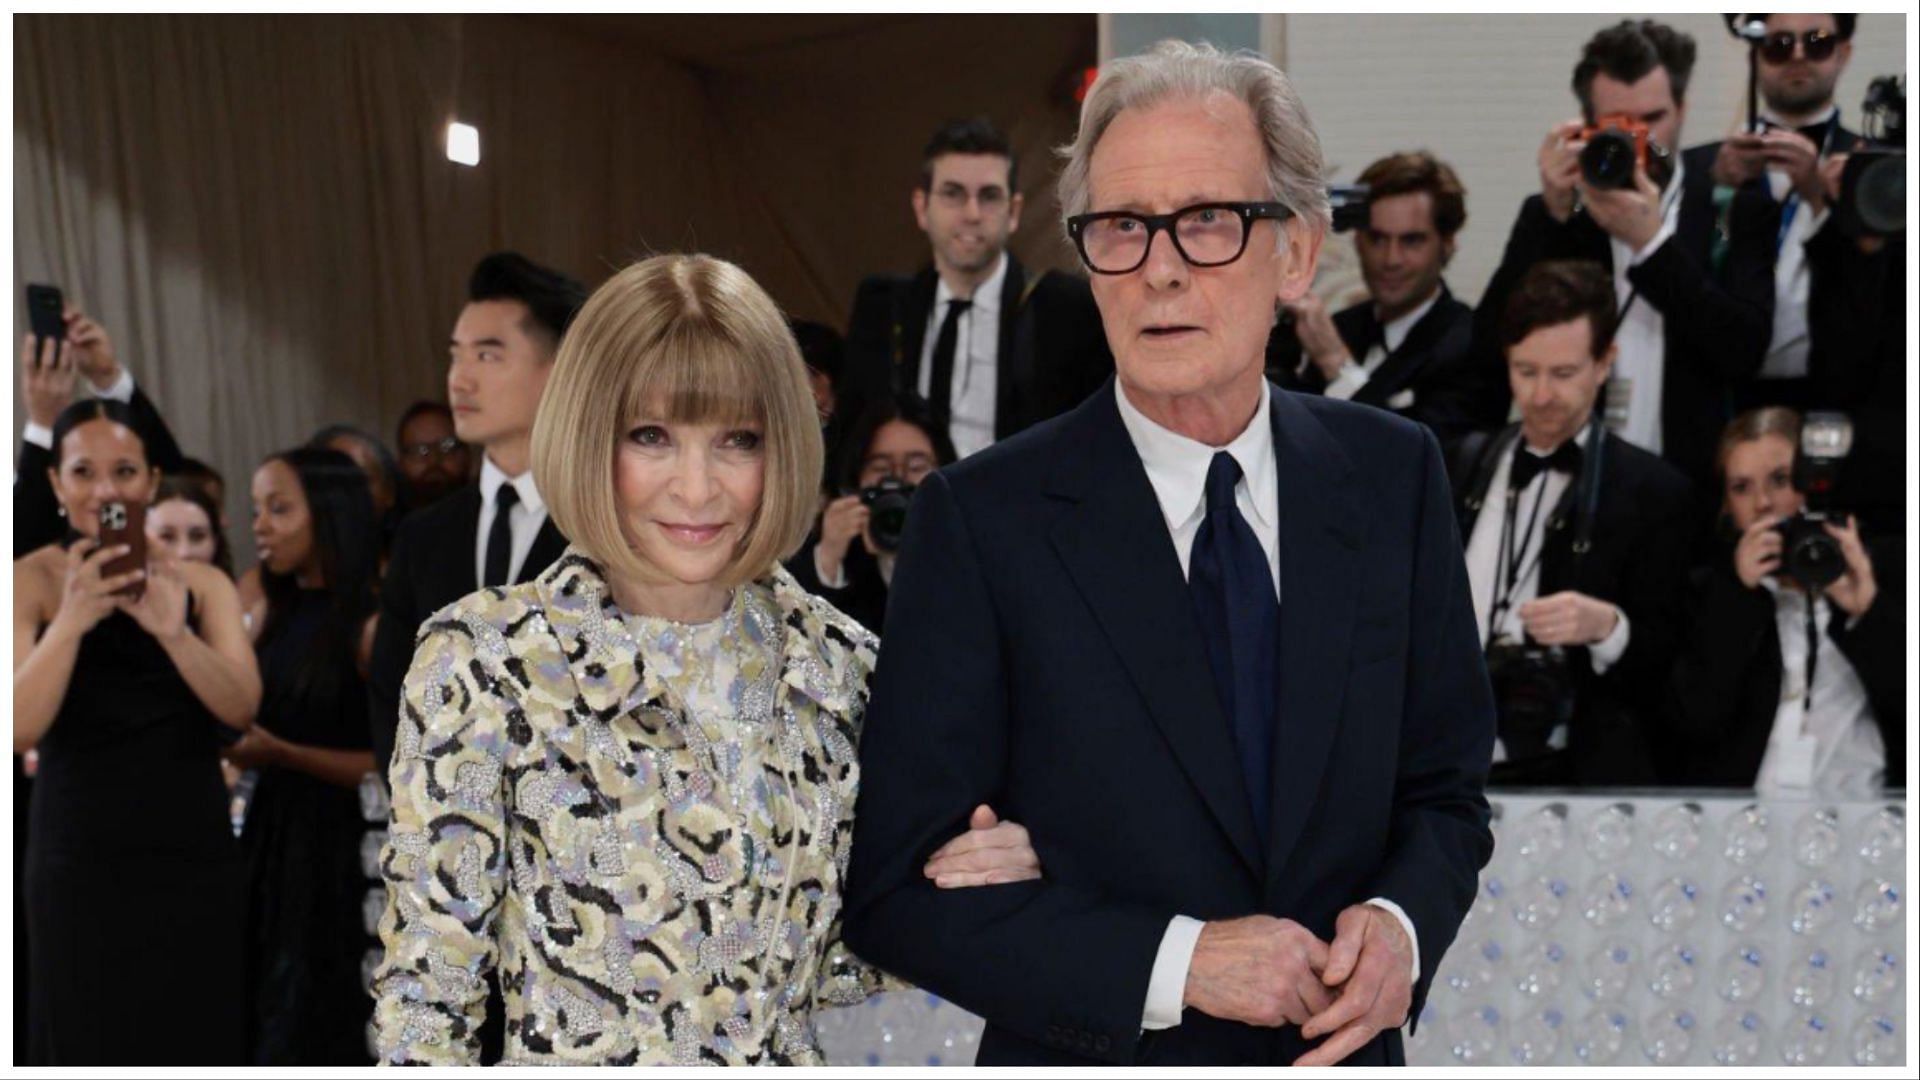 Anna Wintour and Bill Nighy arriving at the 2023 Met Gala (Image via Twitter/21metgala)